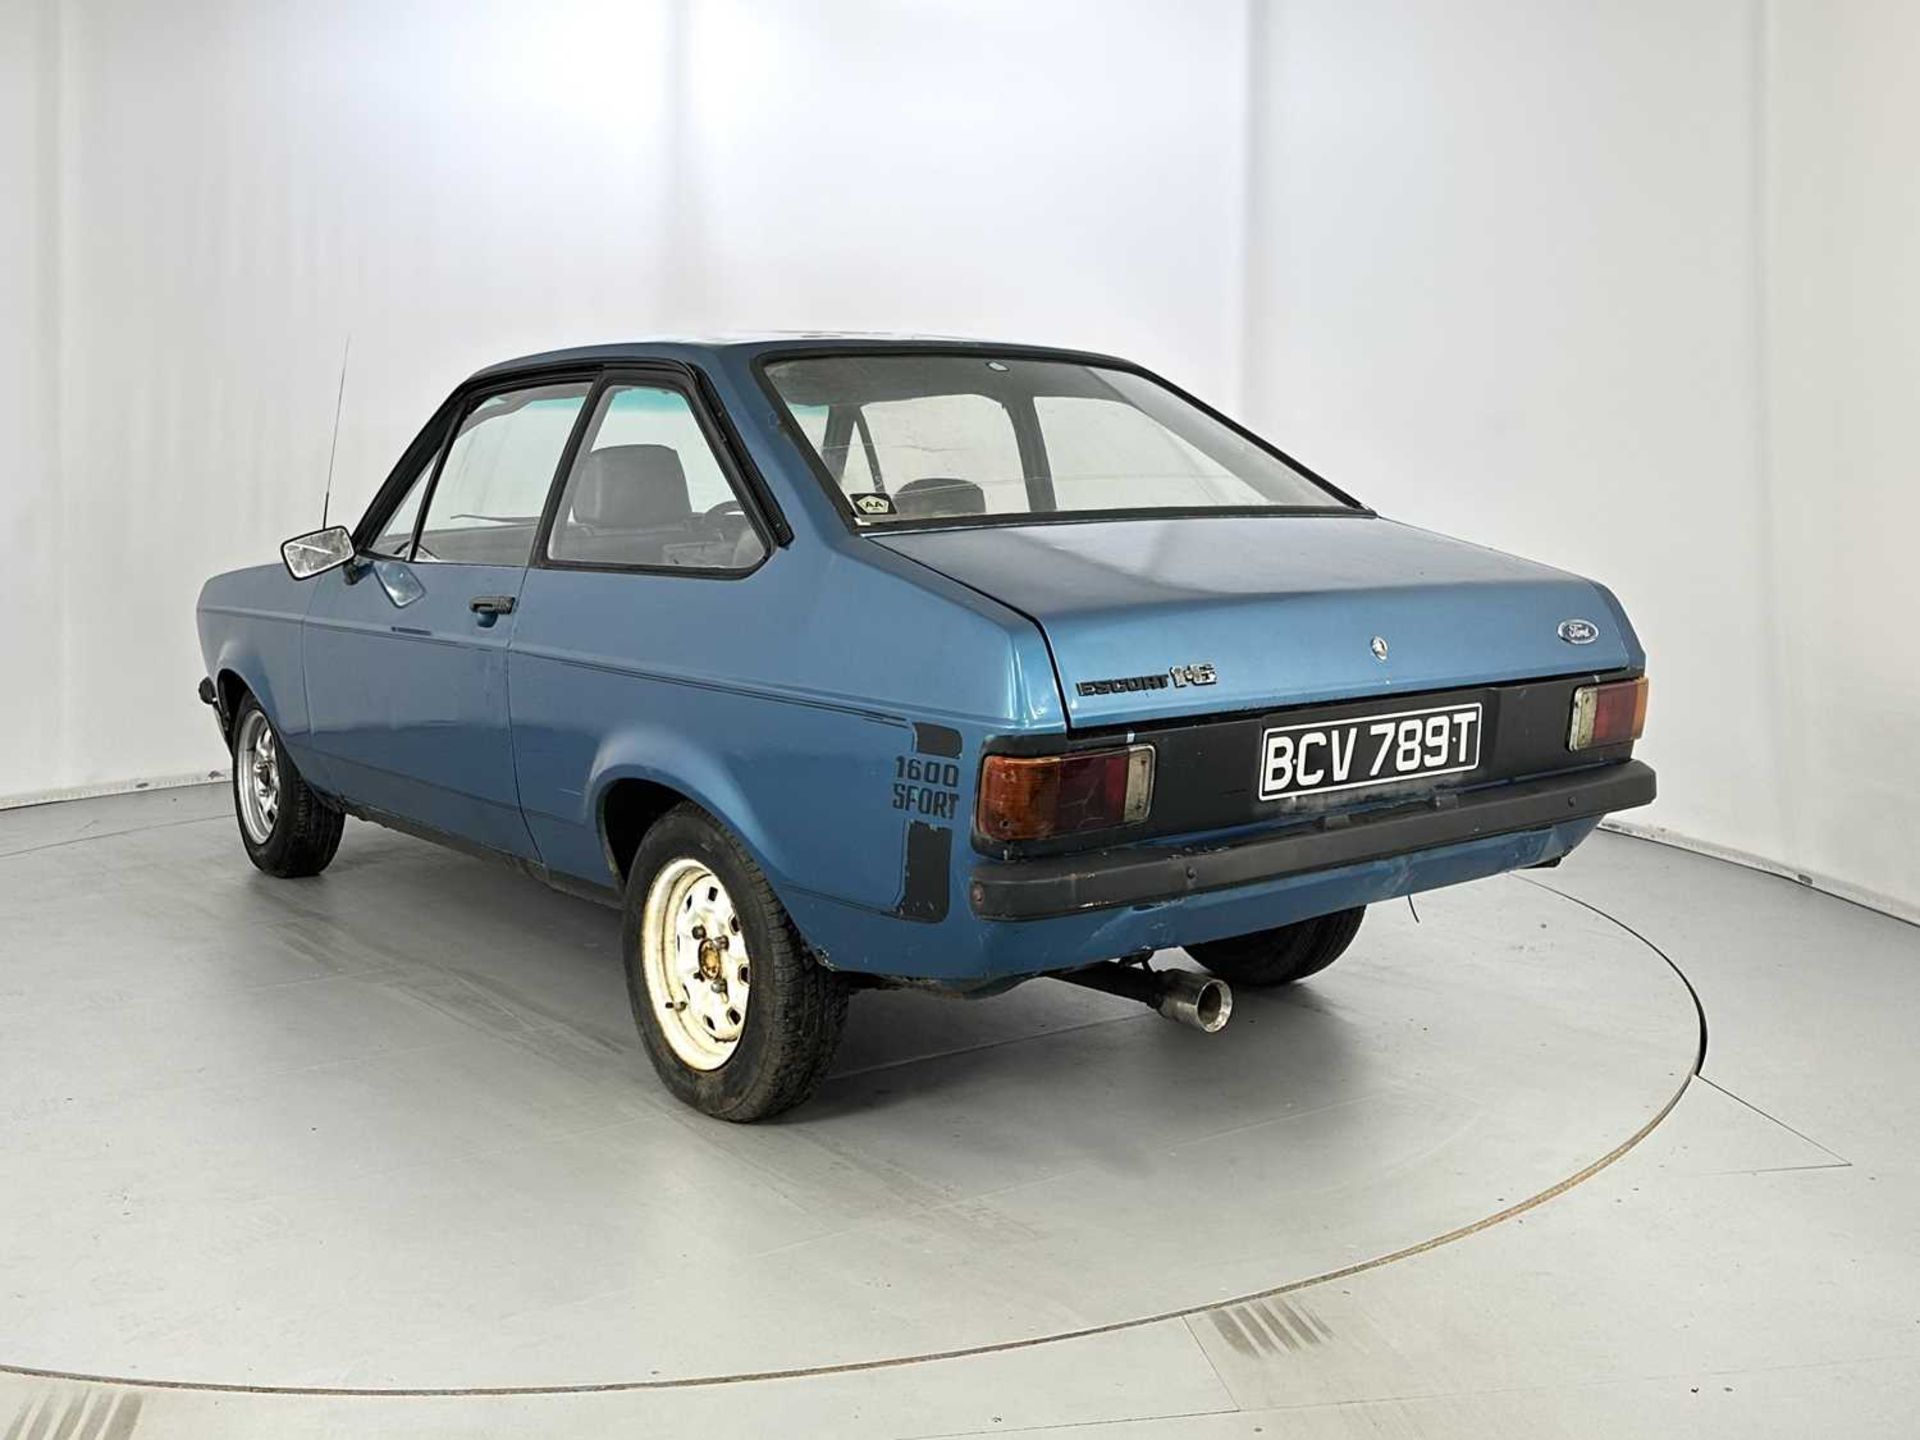 1979 Ford Escort 1600 Sport - Image 7 of 22